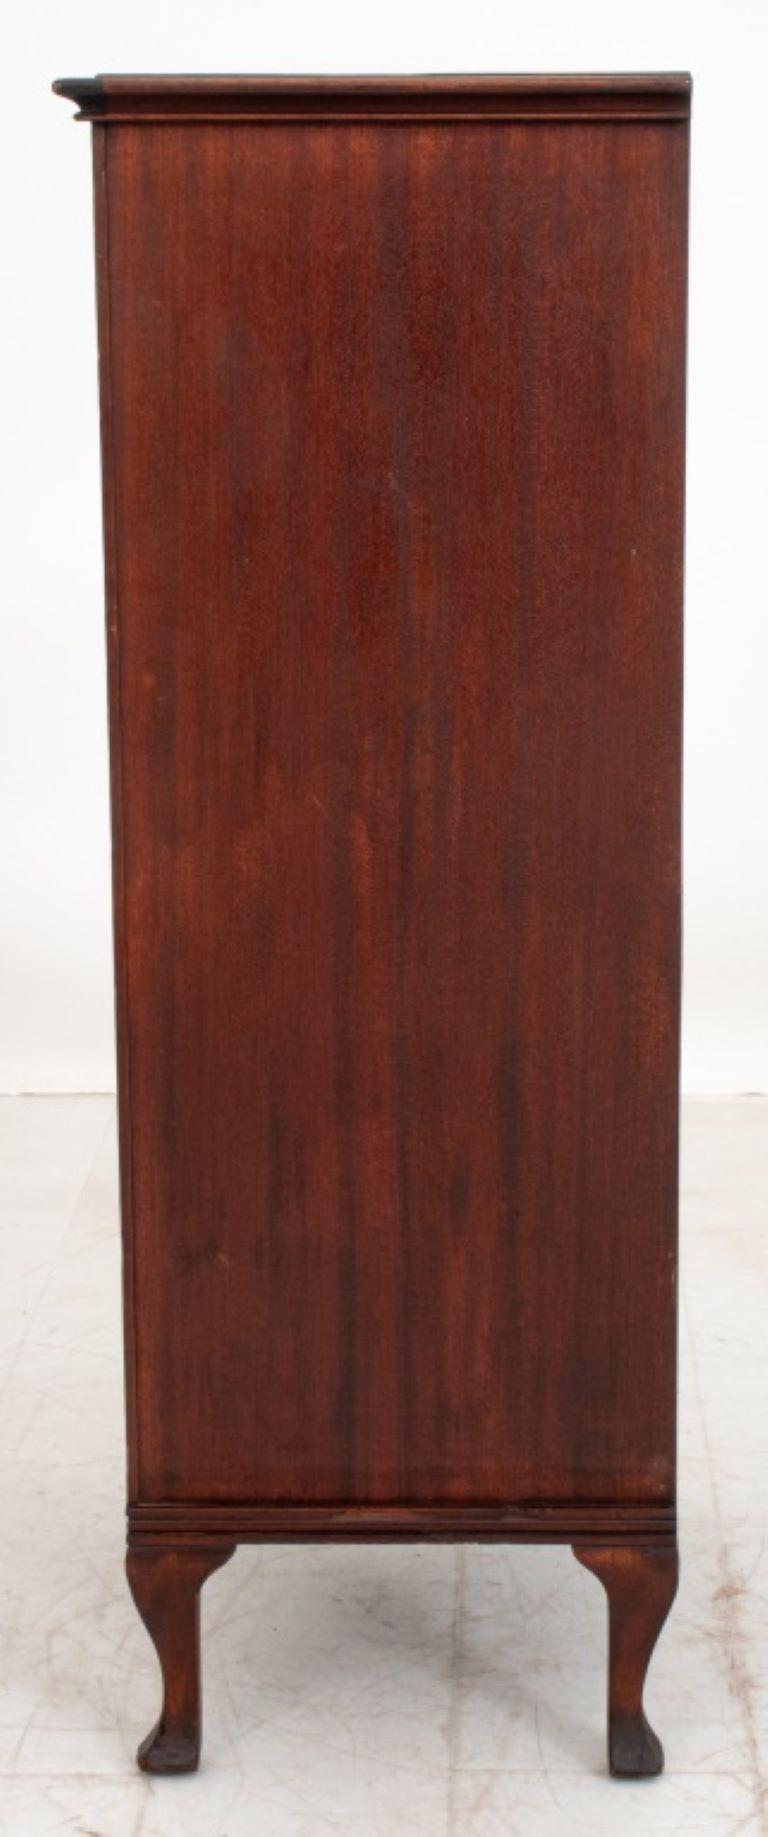 American Classical Mahogany Twenty-one Drawer Sheet Music Cabinet For Sale